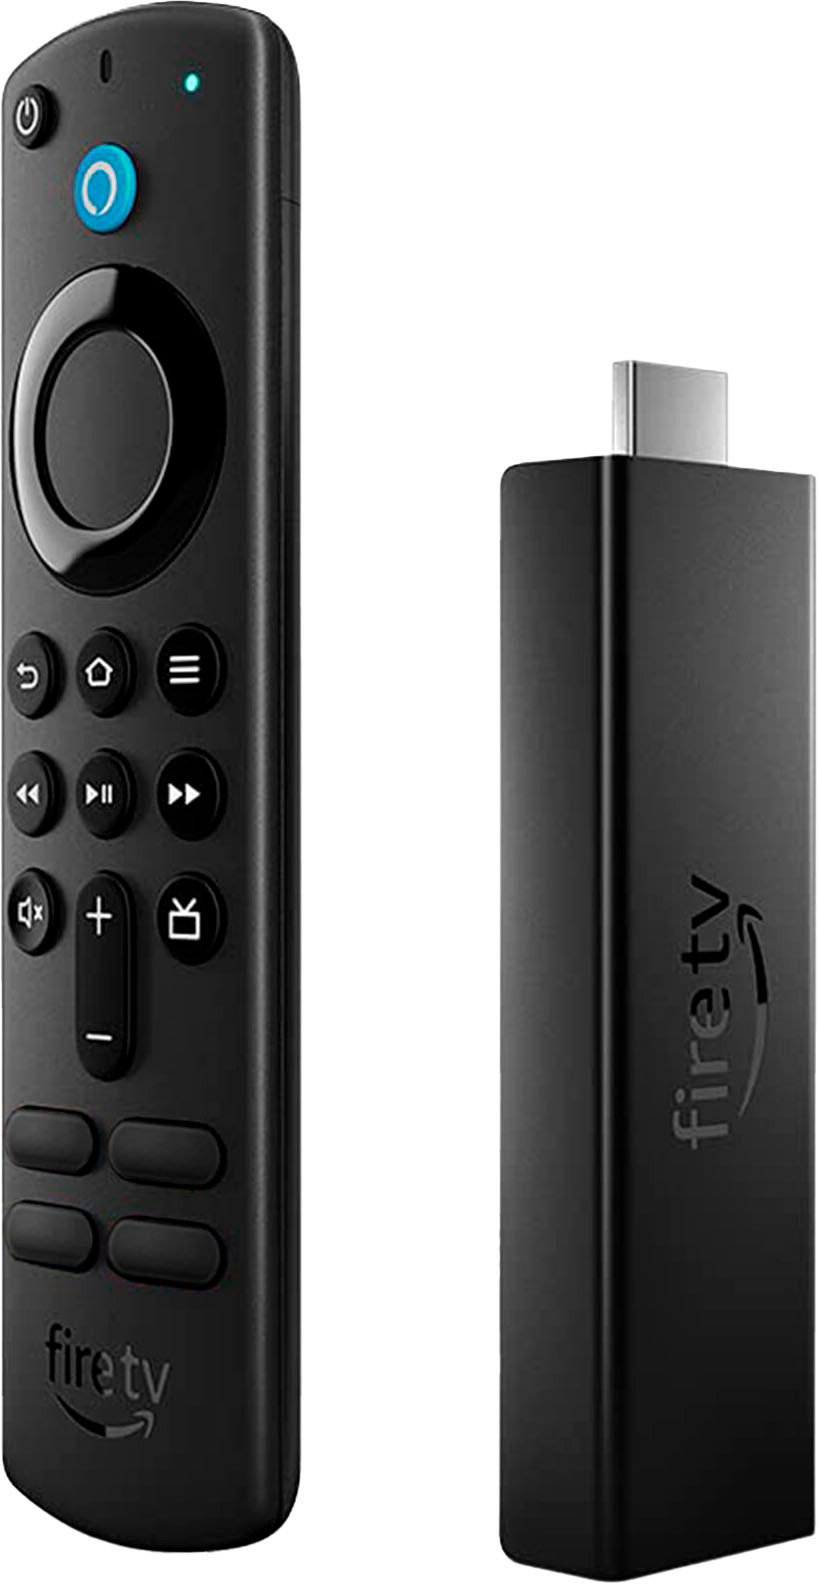 Fire TV Stick 4K Max Streaming Media Player with Alexa Voice Remote  (includes TV controls)